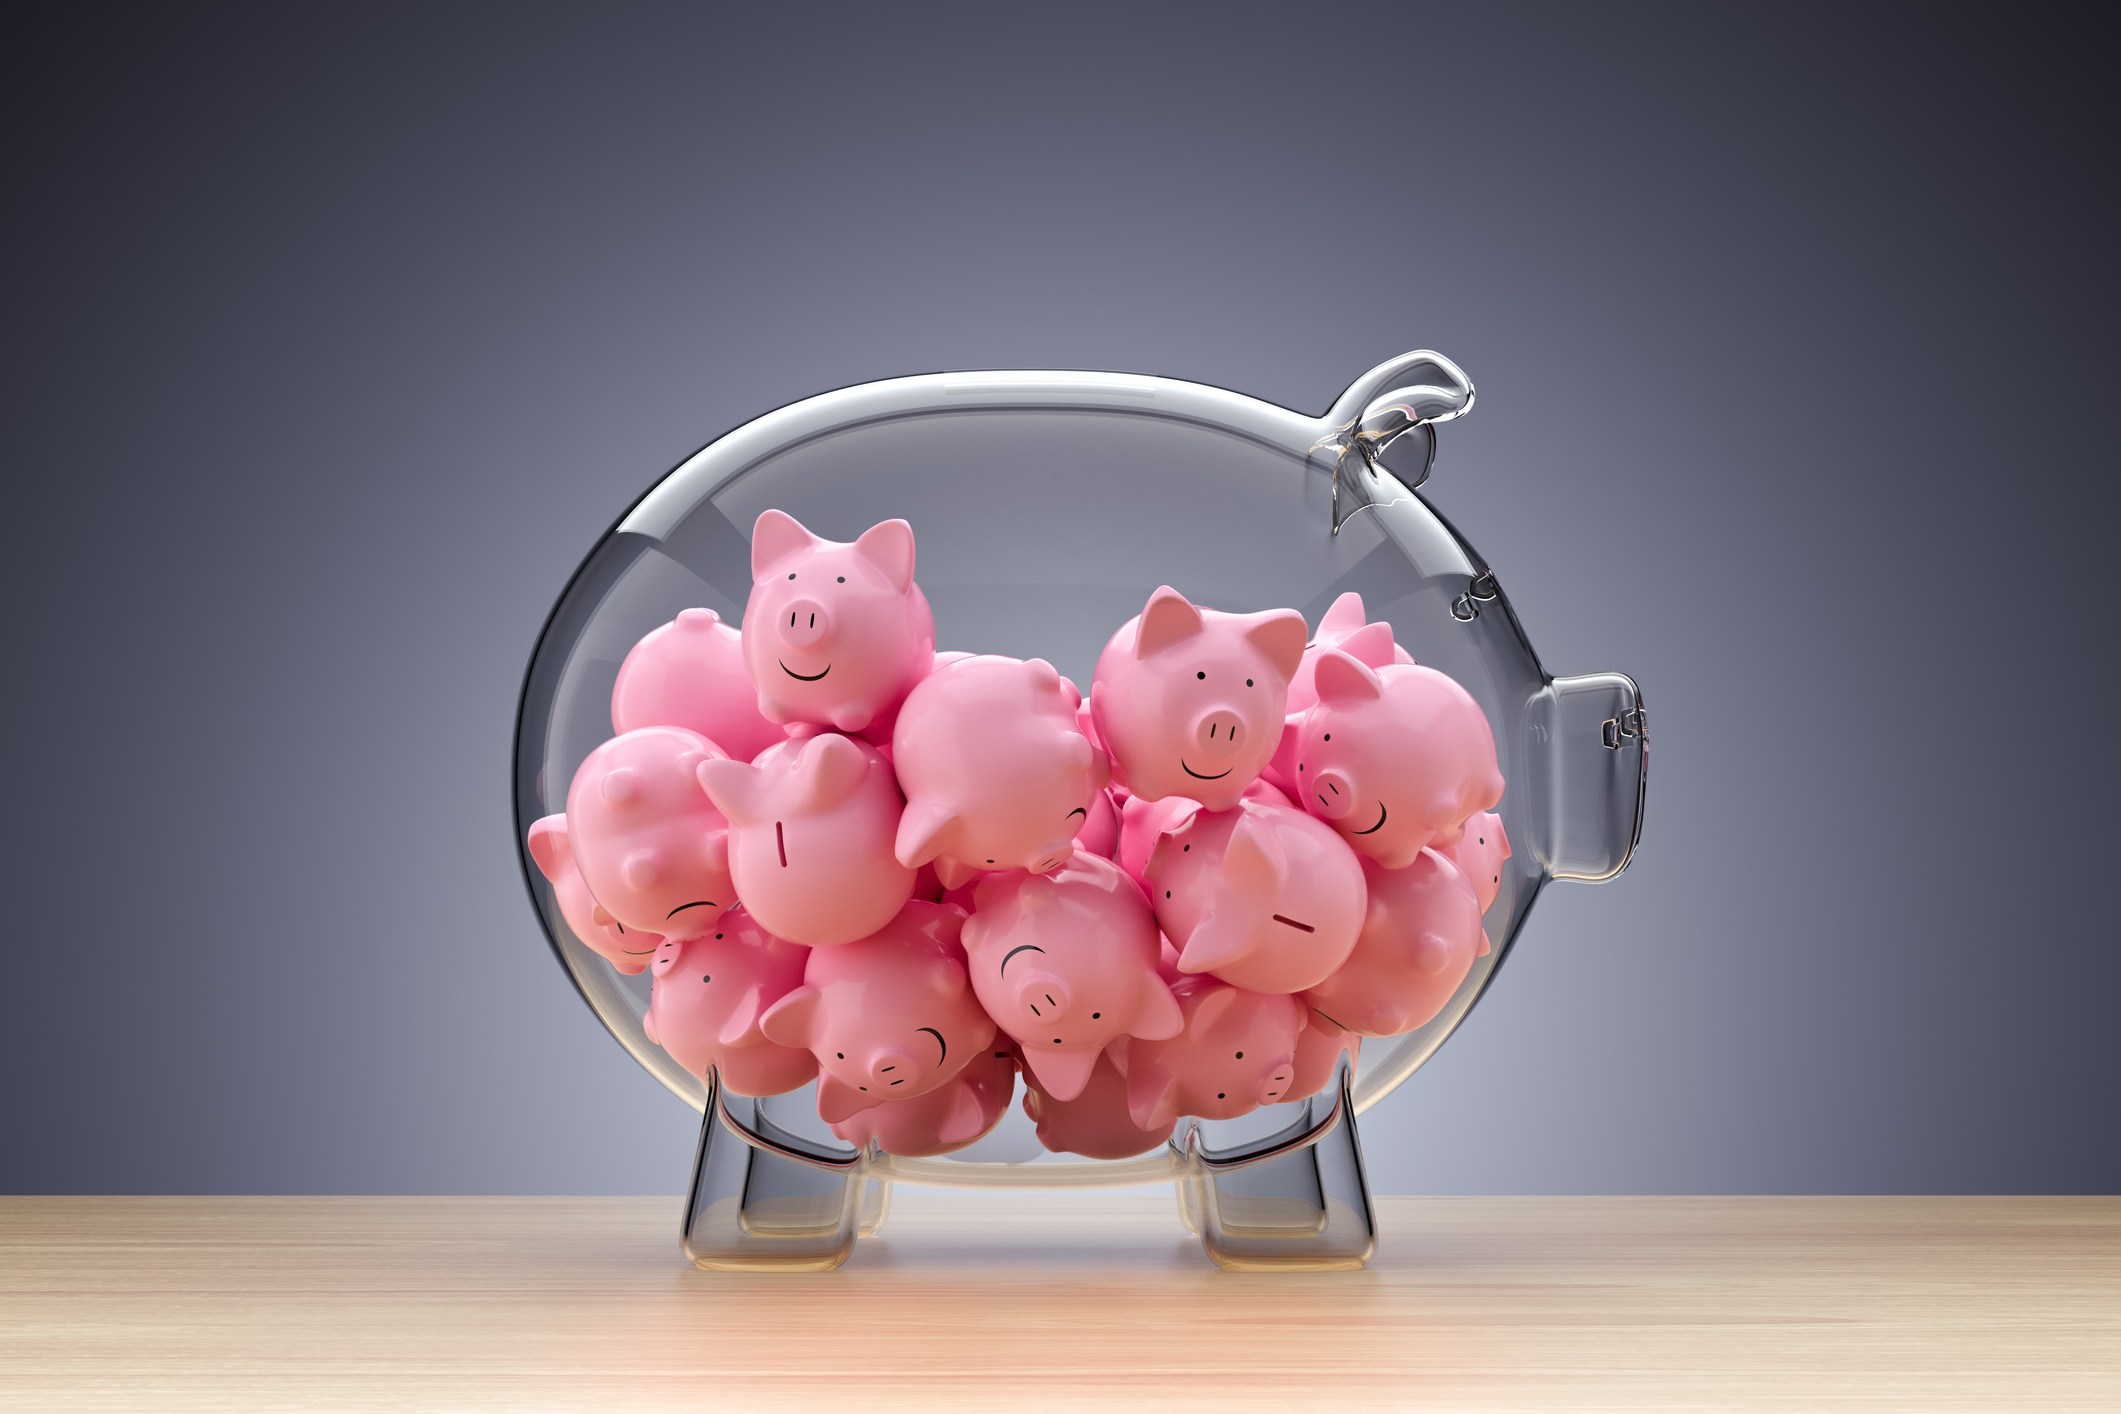 A glass piggy bank filled with little pink pigs